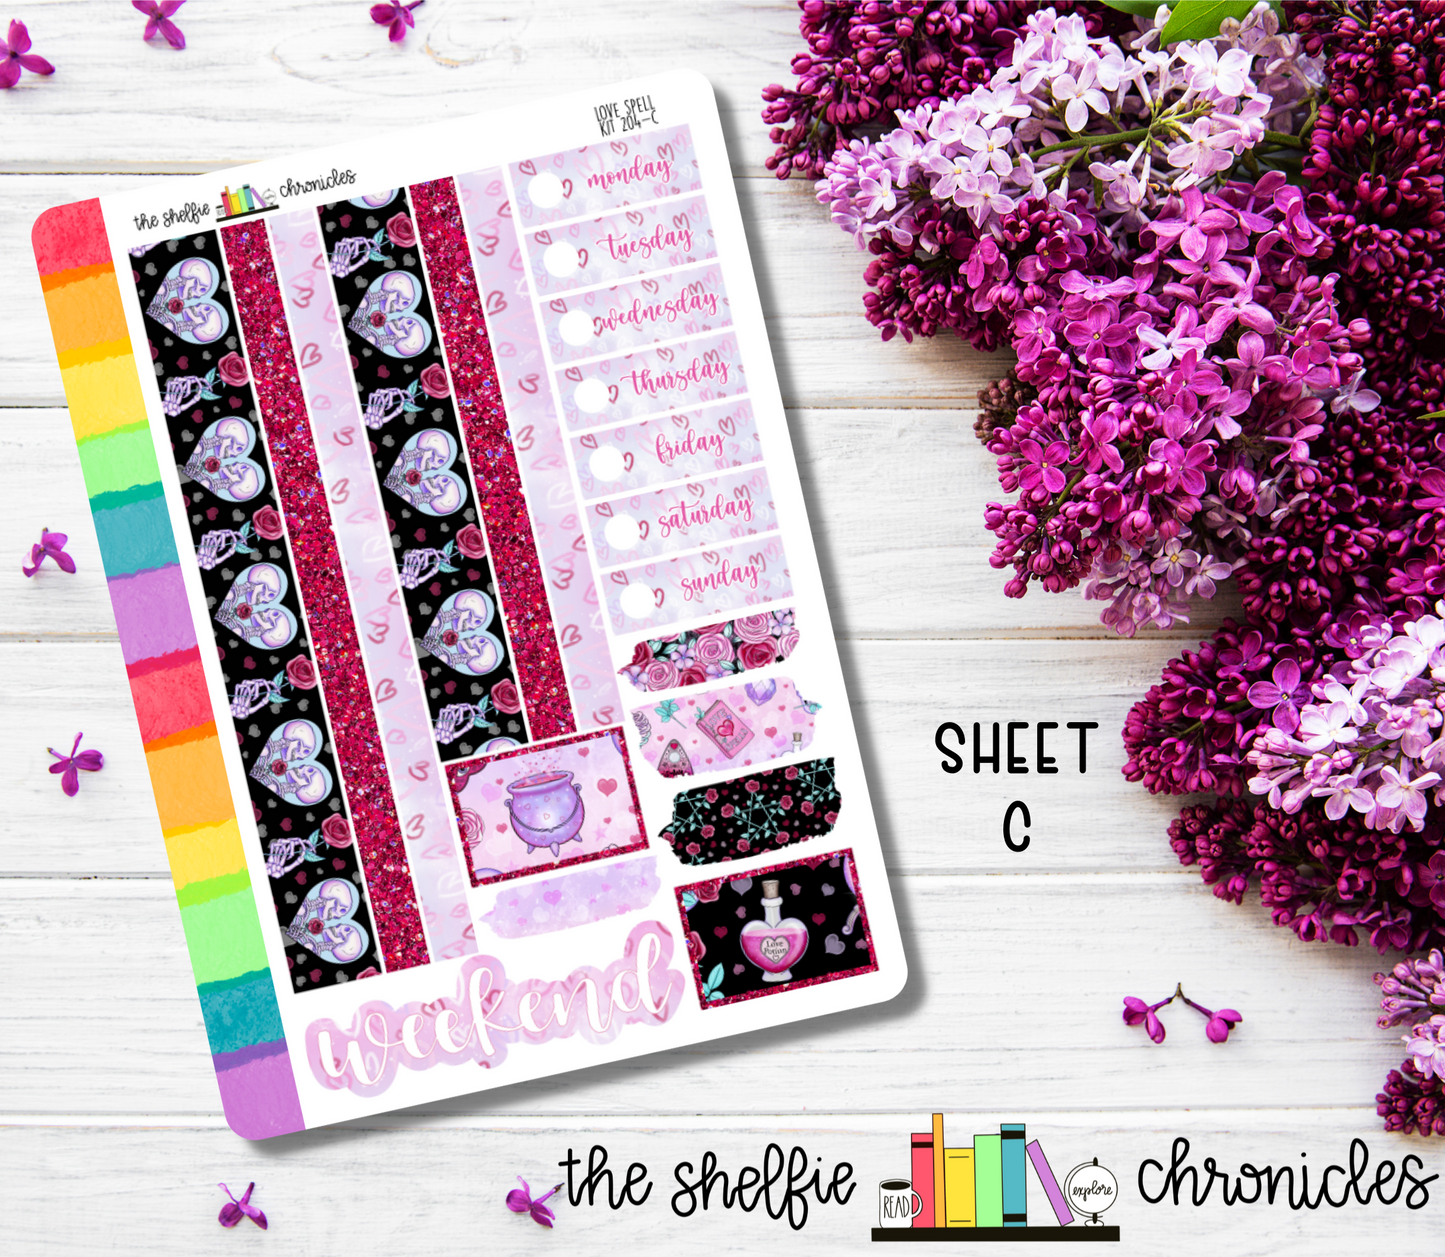 Kit 204 - Love Spell Weekly Kit - Die Cut Stickers - Repositionable Paper - Made To Fit 7x9 Planners